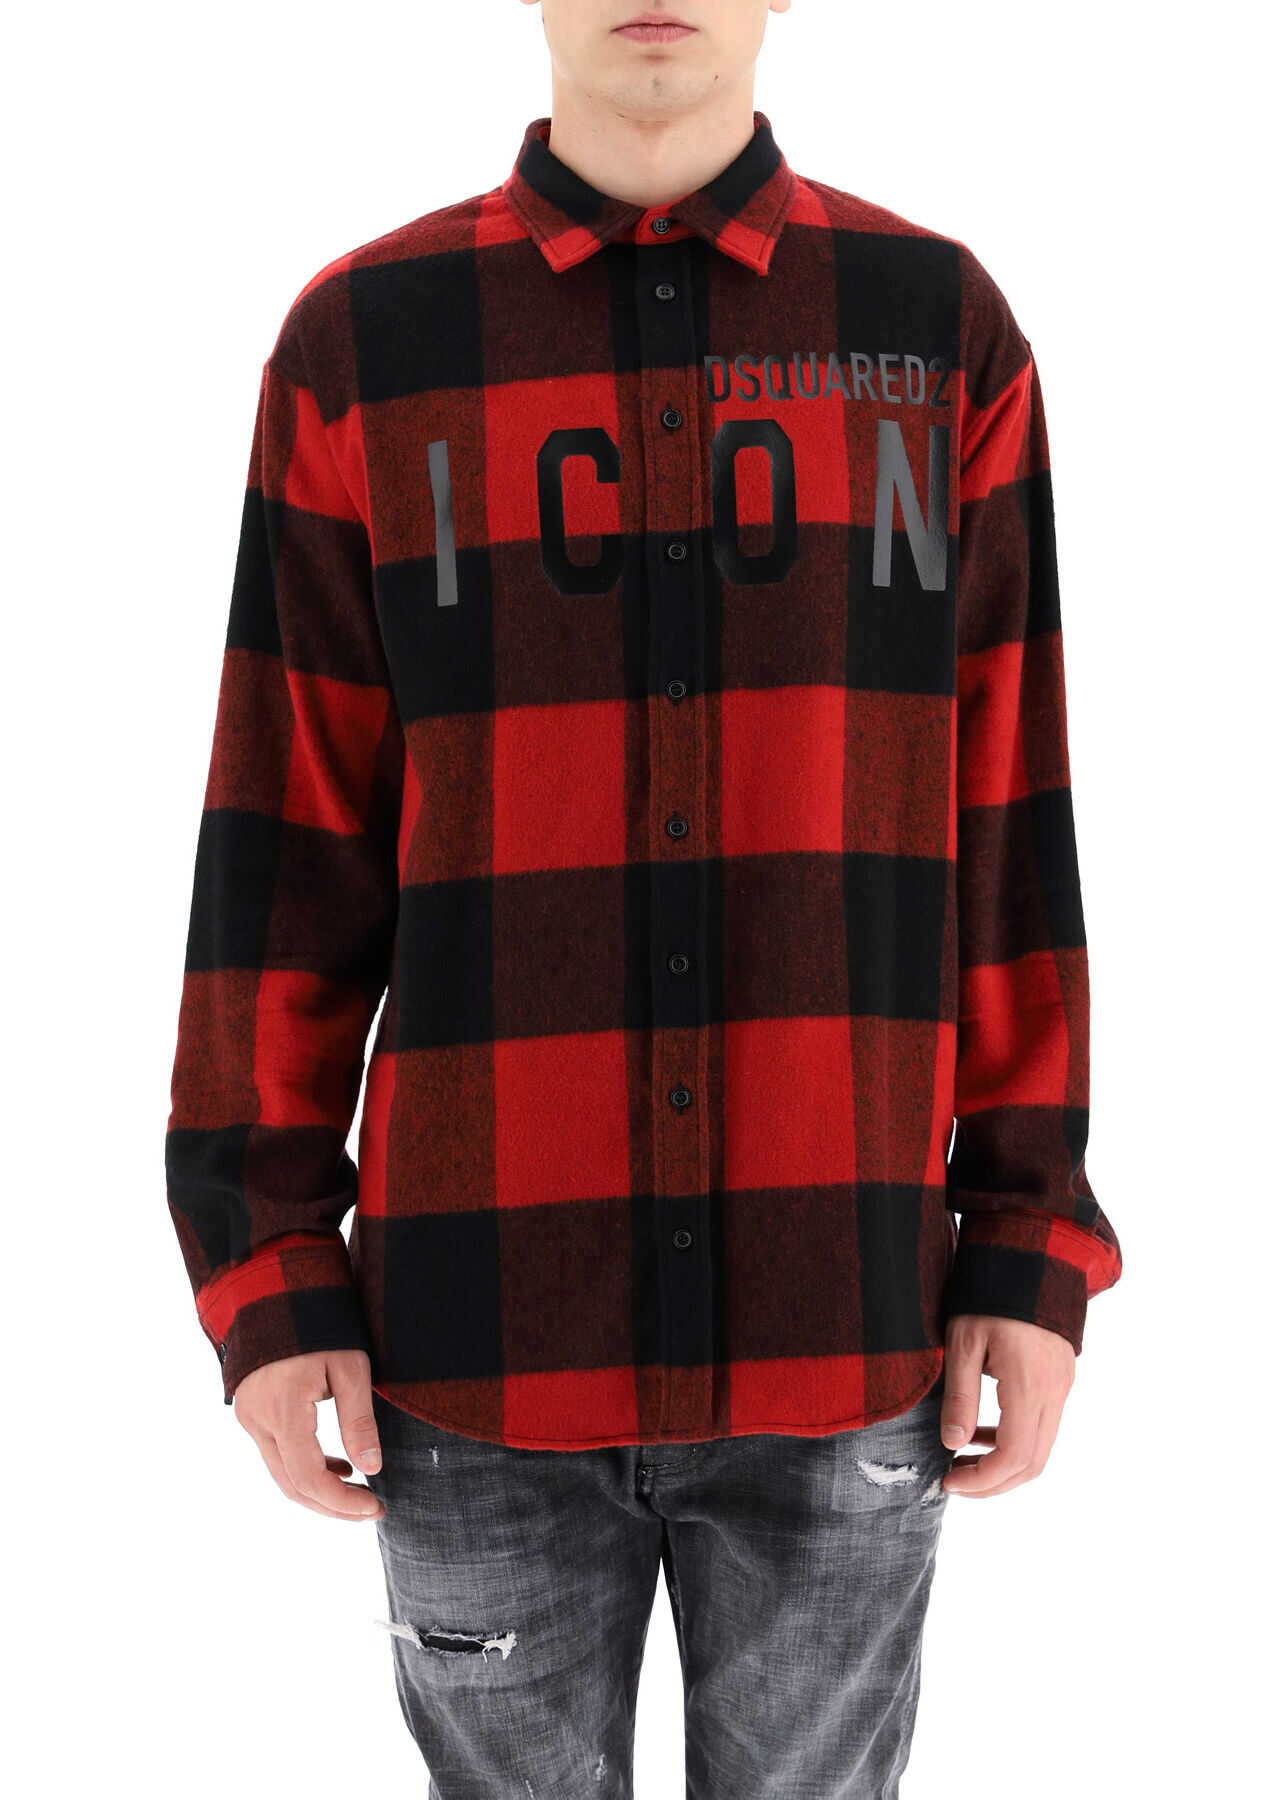 DSQUARED2 Icon Chechered Shirt S79DL0007 S53139 RED MULTI